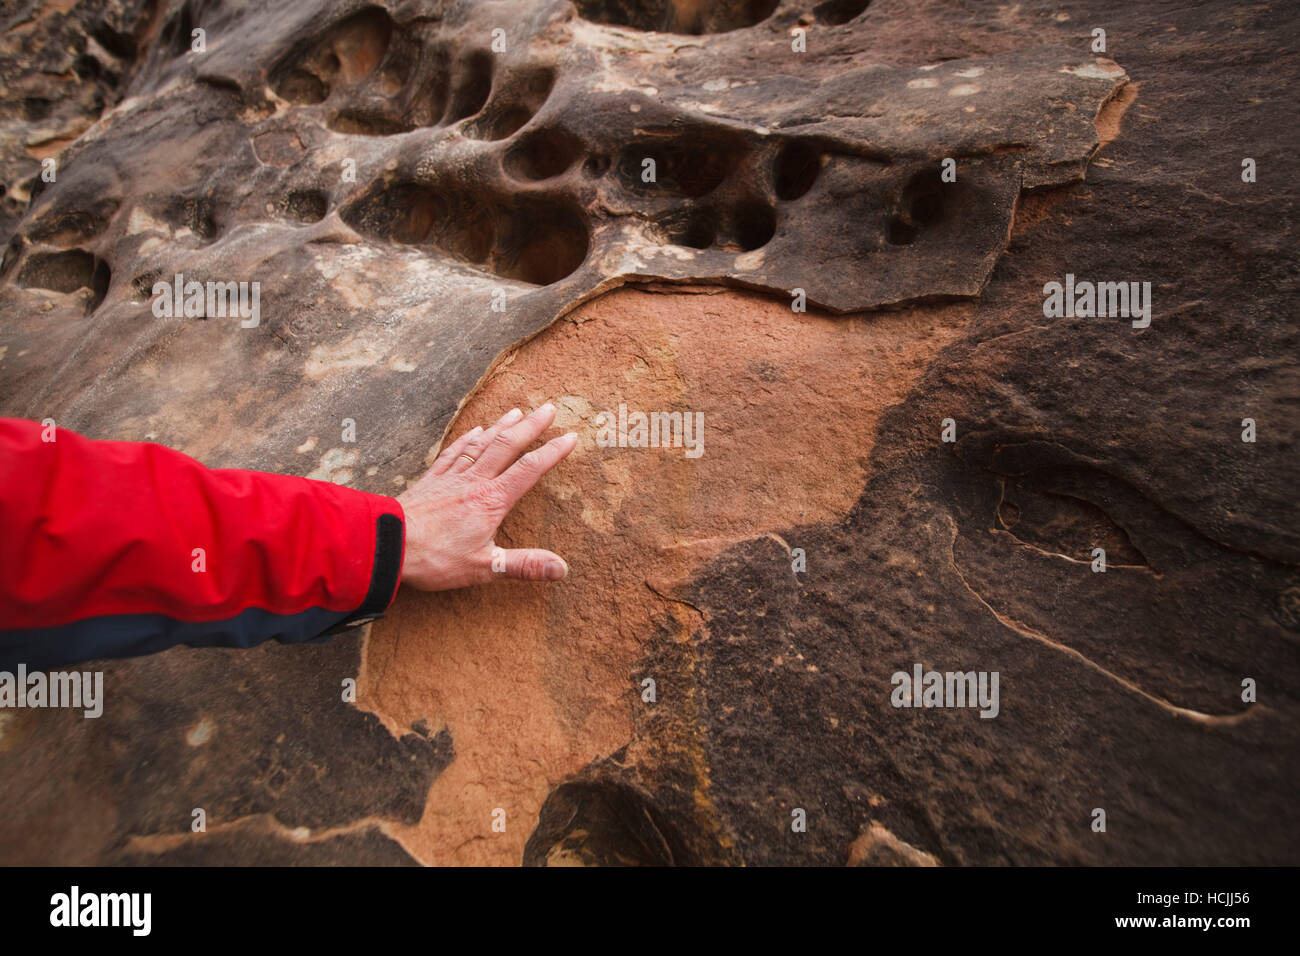 university of Colorado geomorphology professor Robert Anderson points out heat weathered rock on a sandstone wall of Little Wild Horse Canyon, San Rafael Swell, Utah. Darker surfaces are more susceptible since they absorb more heat from the sun. Stock Photo